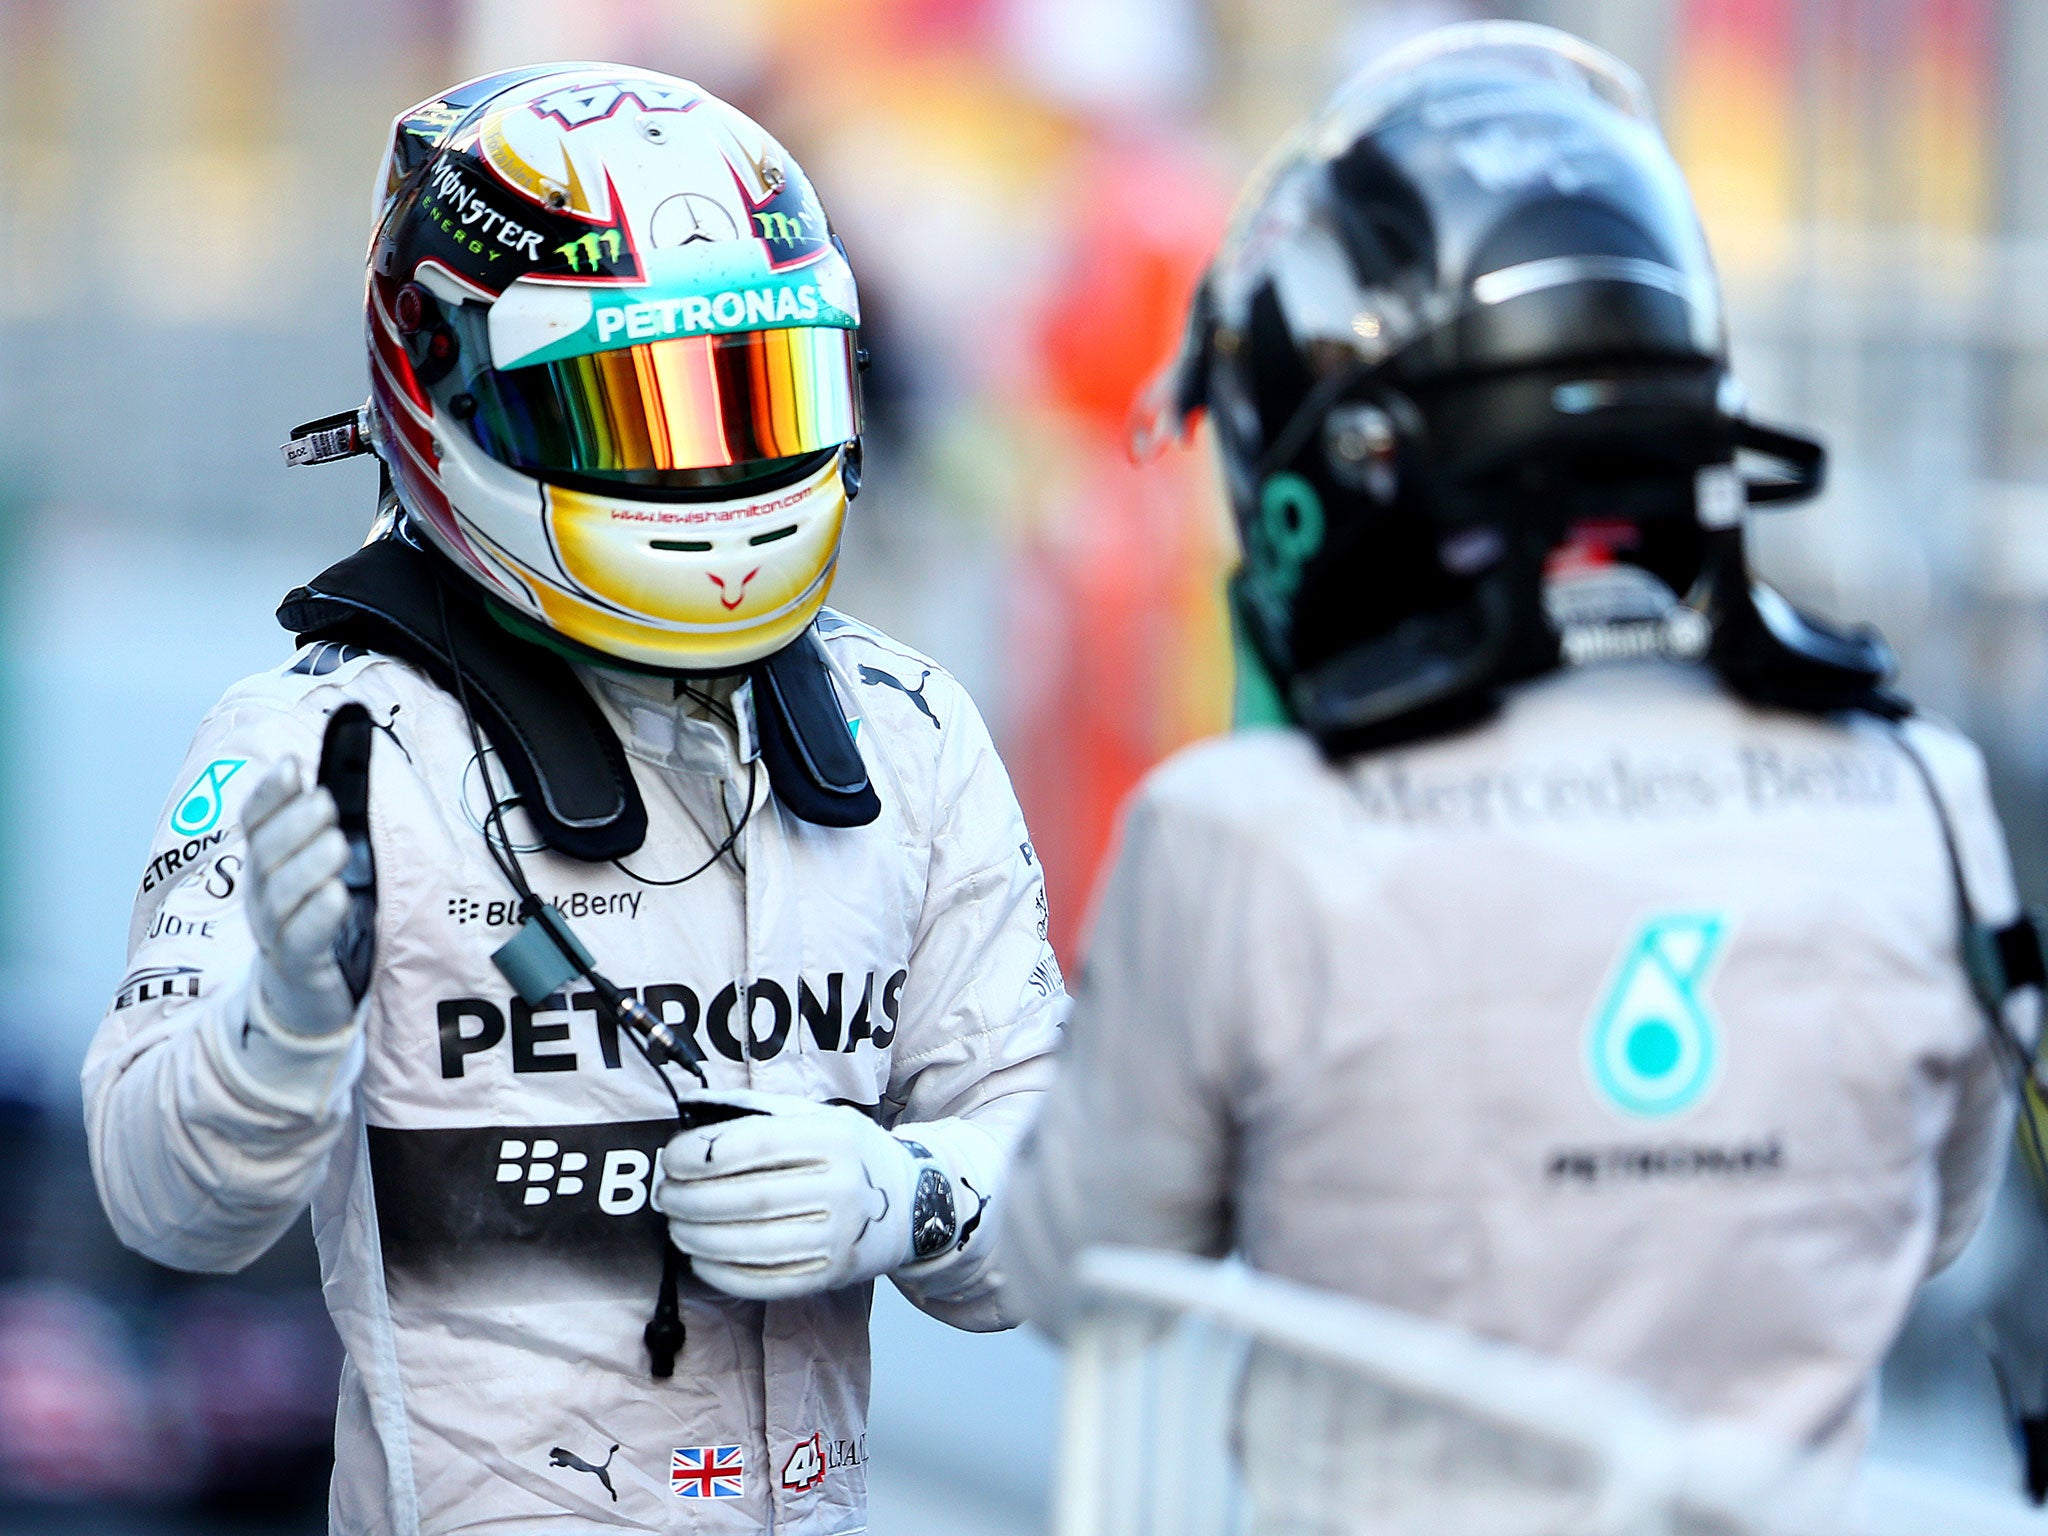 Lewis Hamilton shakes hands with Nico Rosberg after the Russian Grand Prix